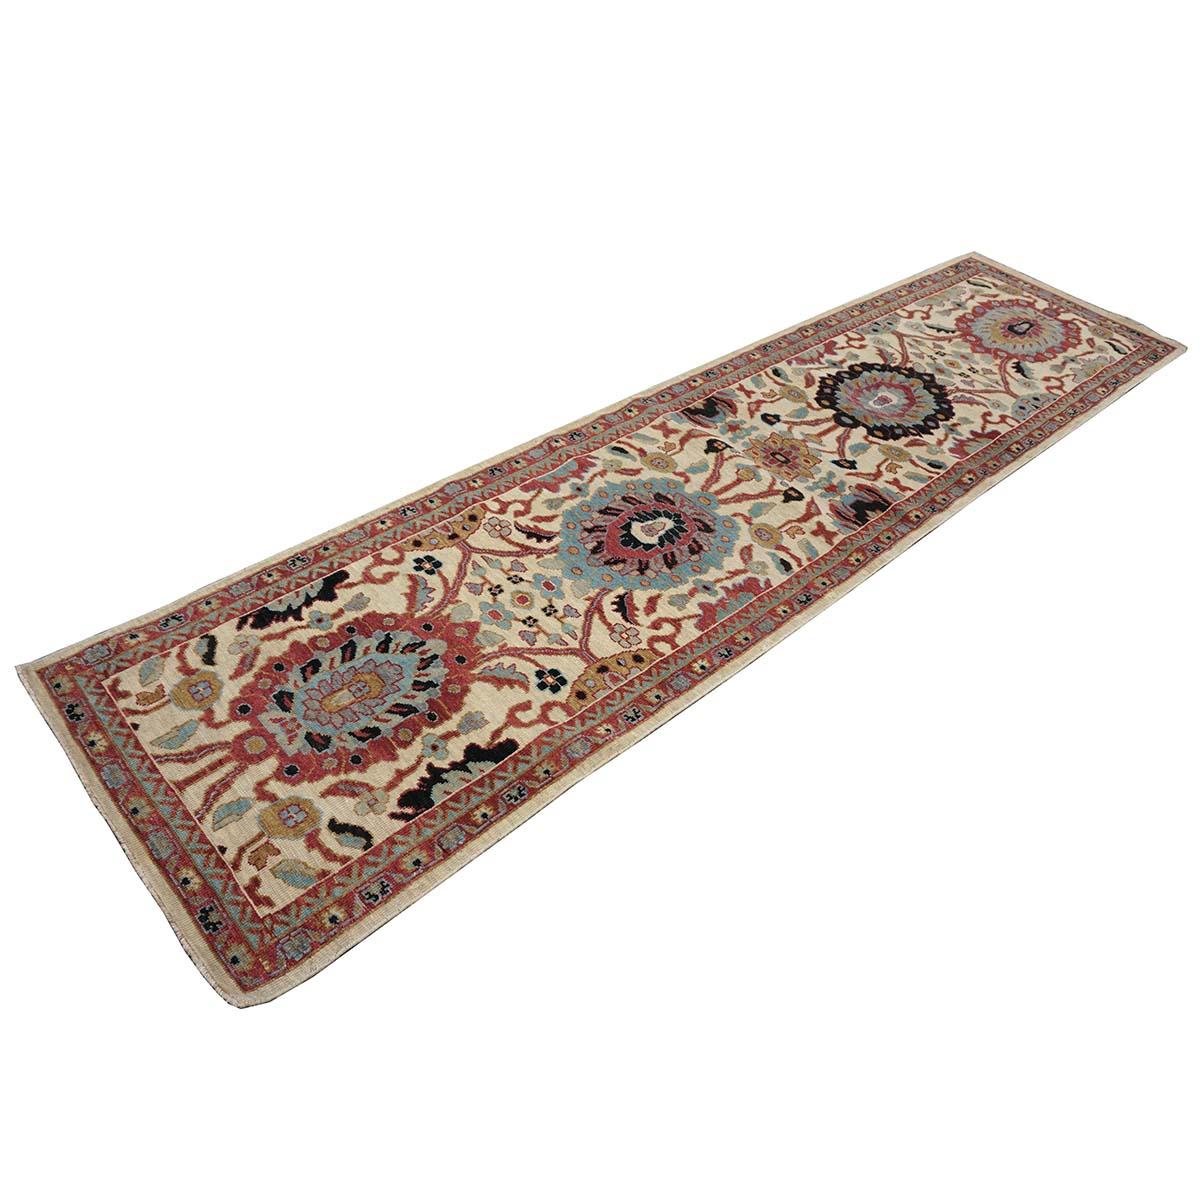 21st Century Sultanabad Master 3x12 Ivory, Red, & Blue Hallway Runner Rug In Excellent Condition For Sale In Houston, TX